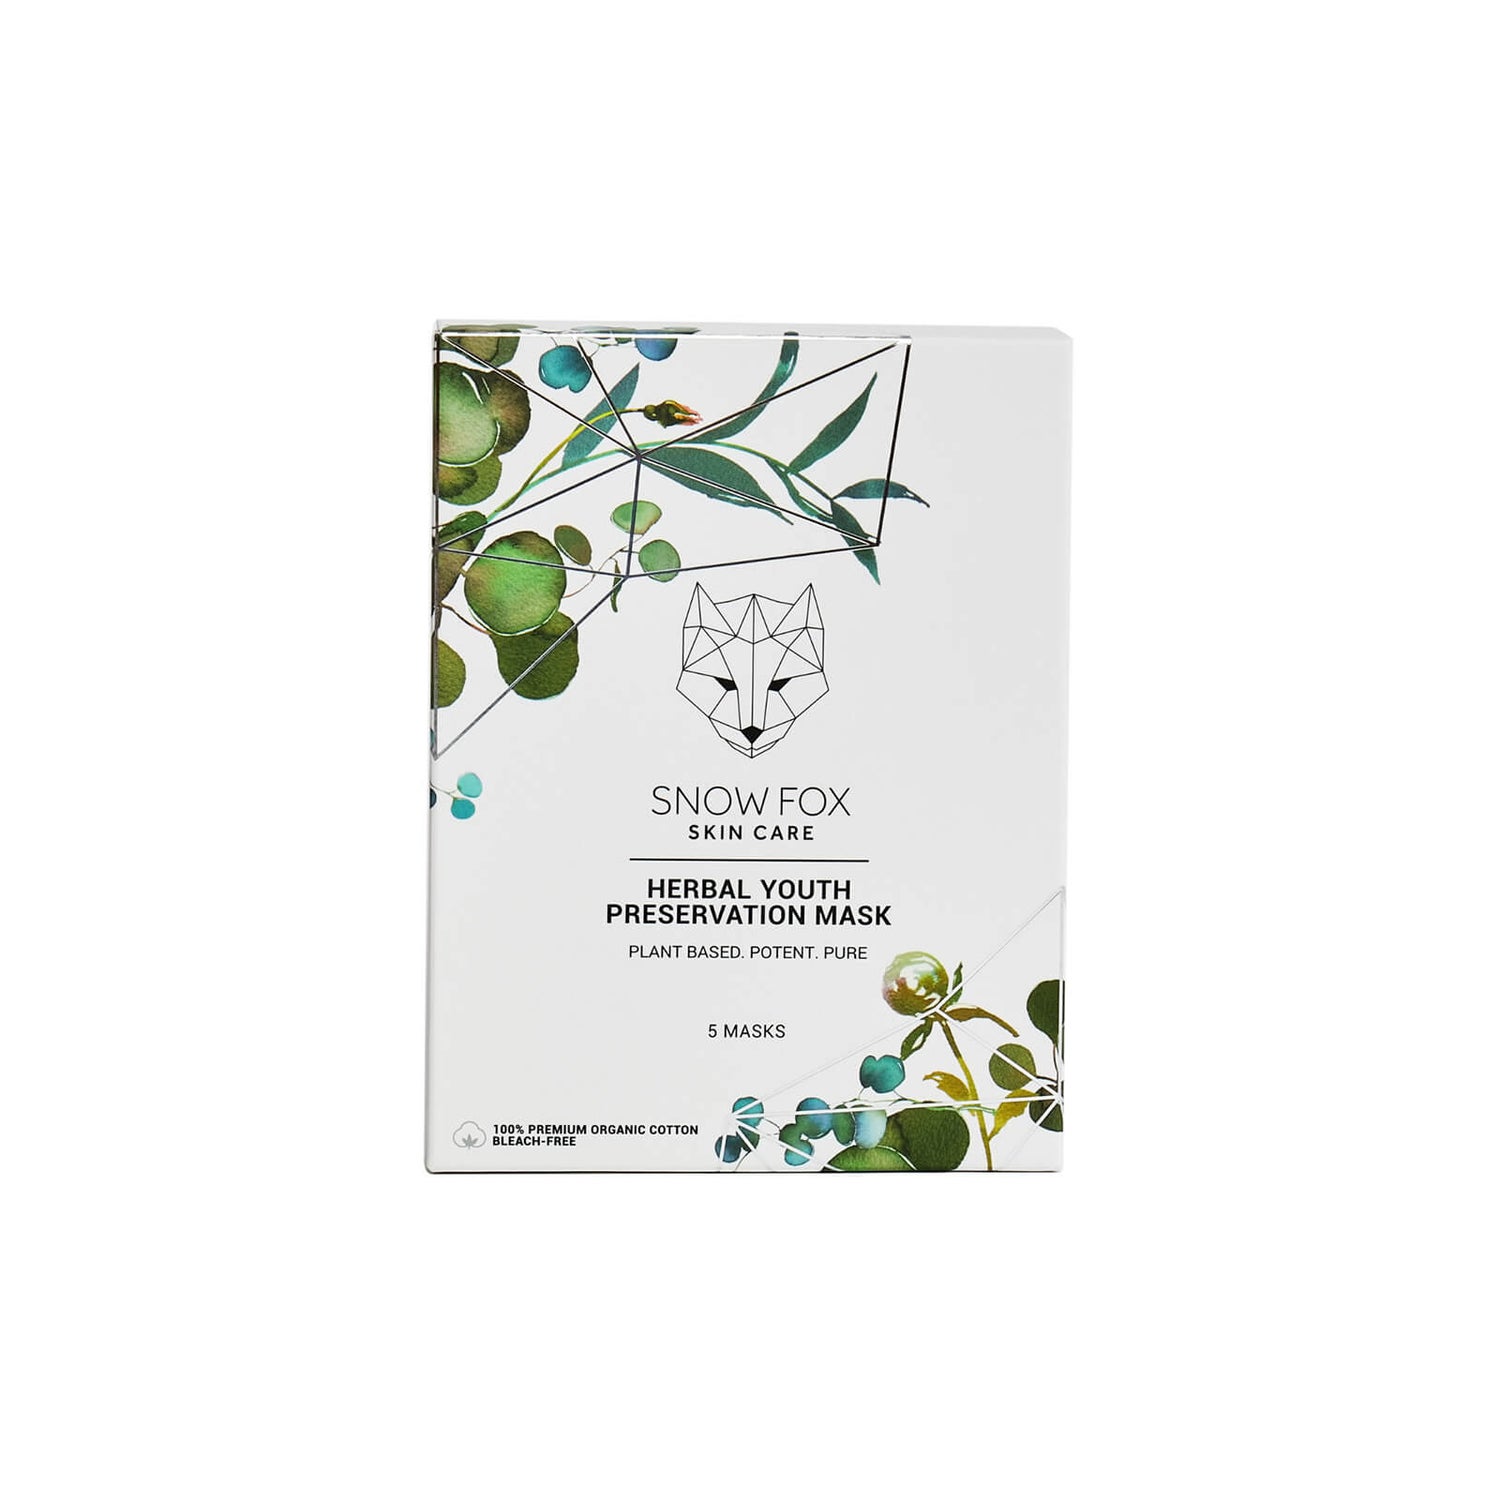 Snow Fox Herbal Youth Preservation Mask (Set of 5)